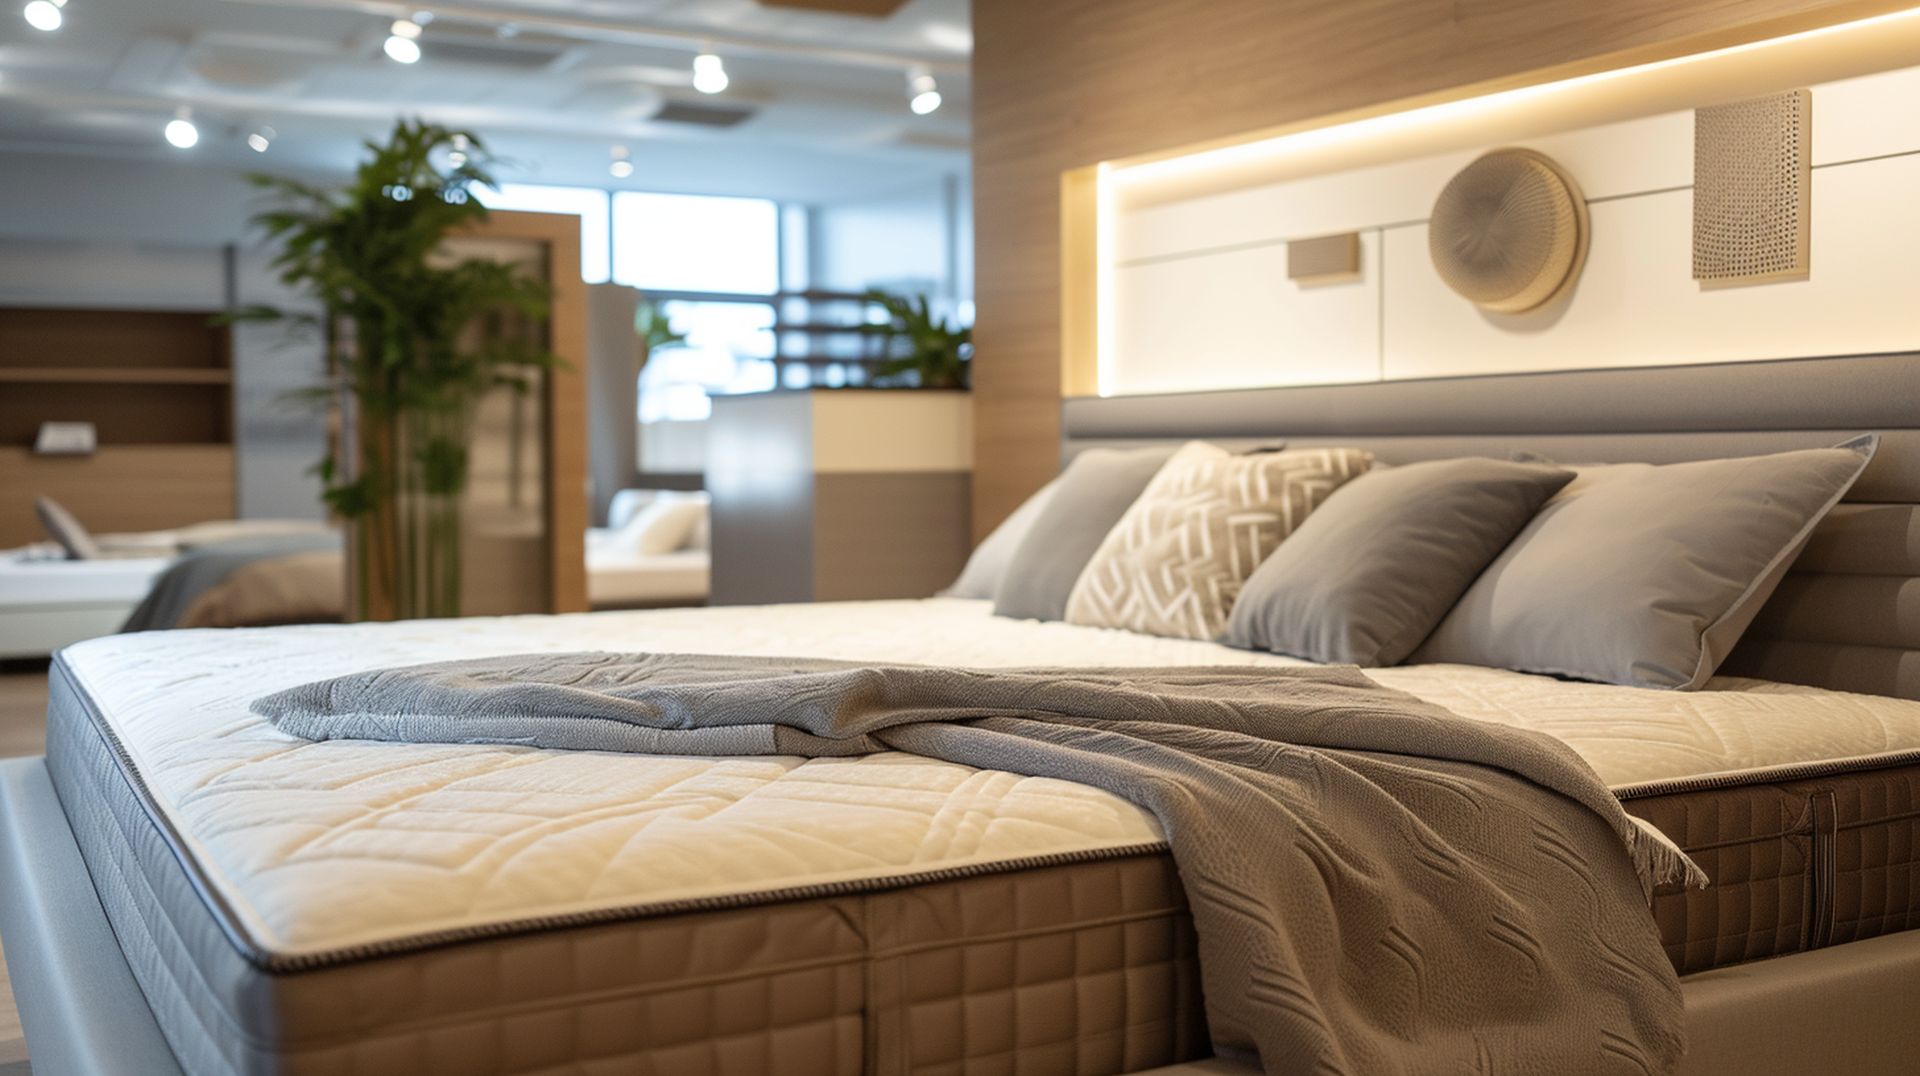 Local Westfield mattress stores have the best prices, sales, and deals if you're looking for a new mattress in Westfield